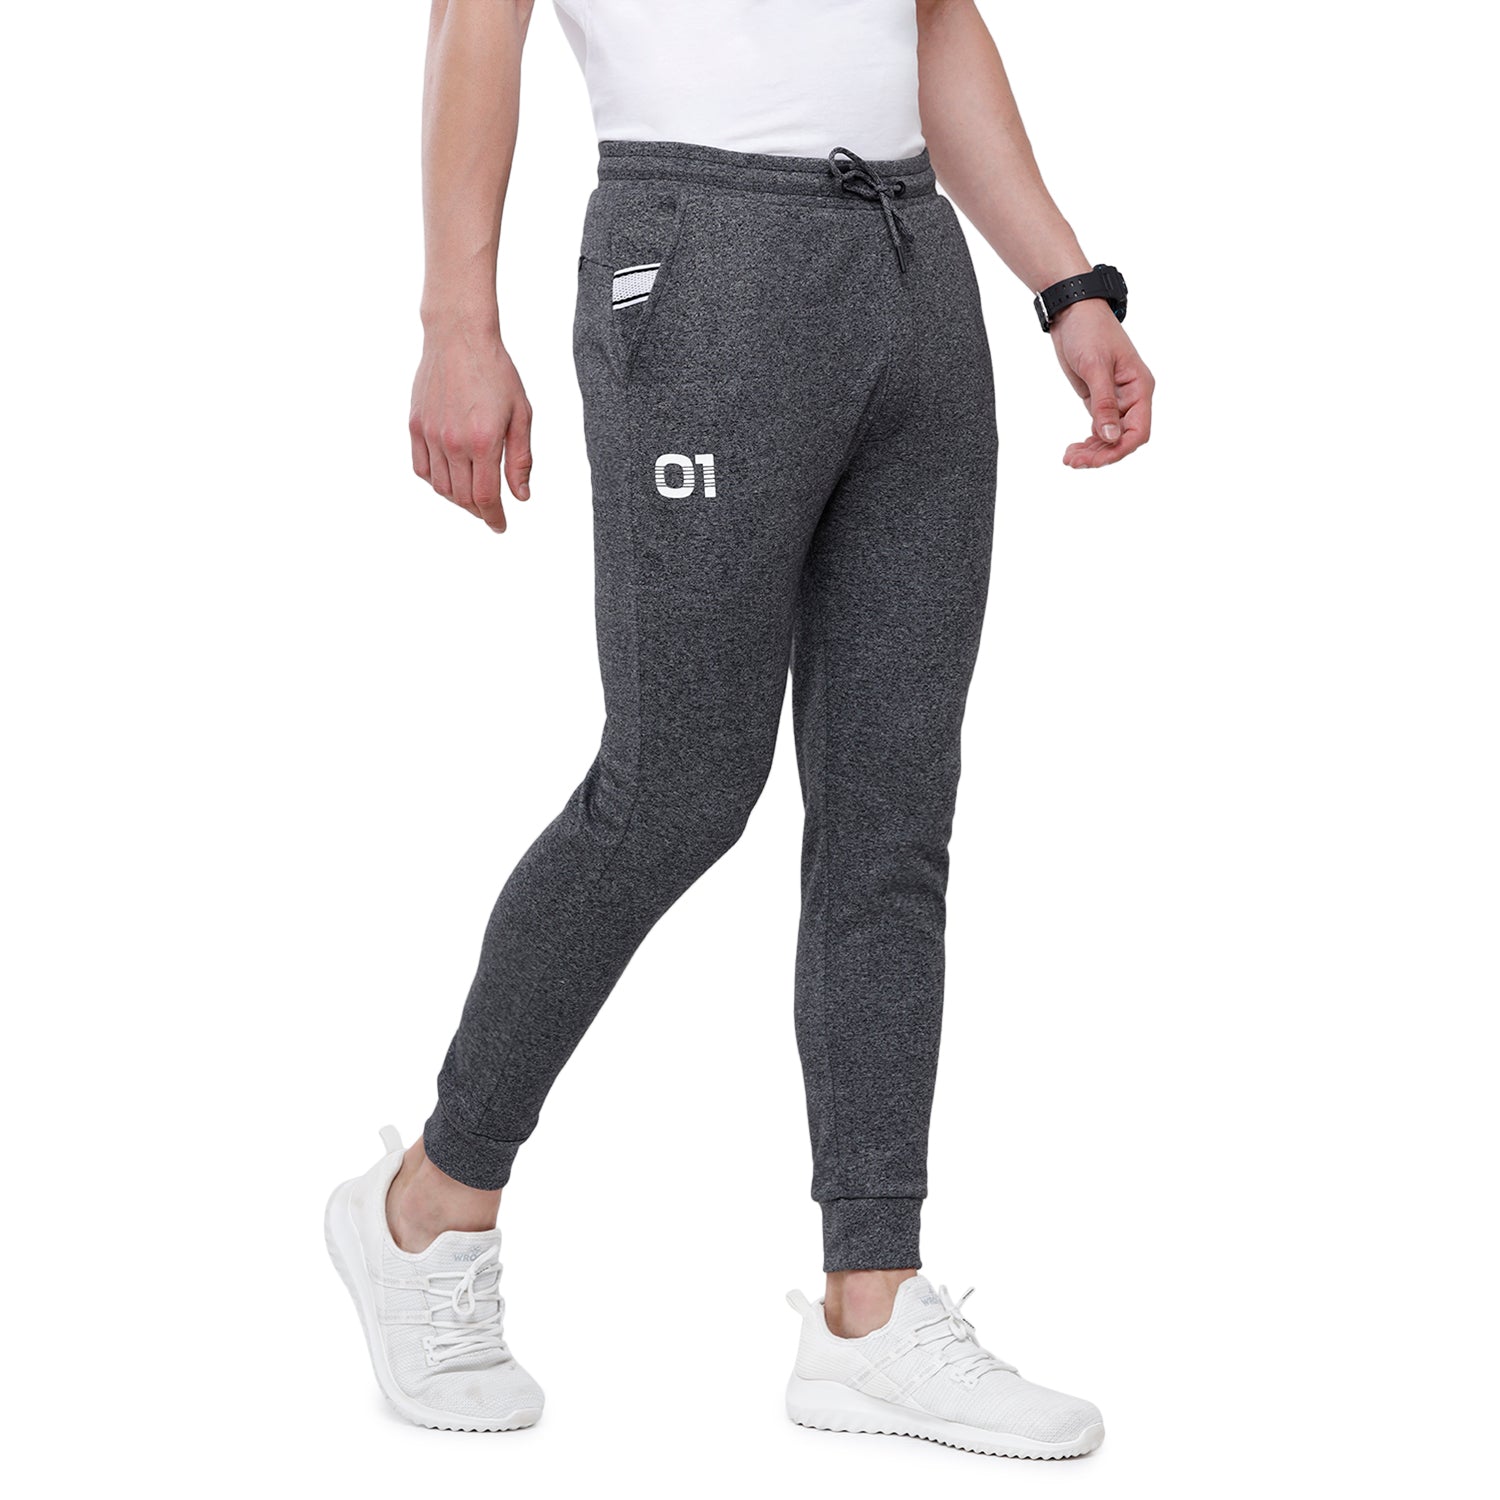 Wholesale 92 Polyester 8 Spandex Running Sport Casual Pants for Men Jogger  Pants Mens Pants  China Trouser and Jogger Pants price  MadeinChinacom